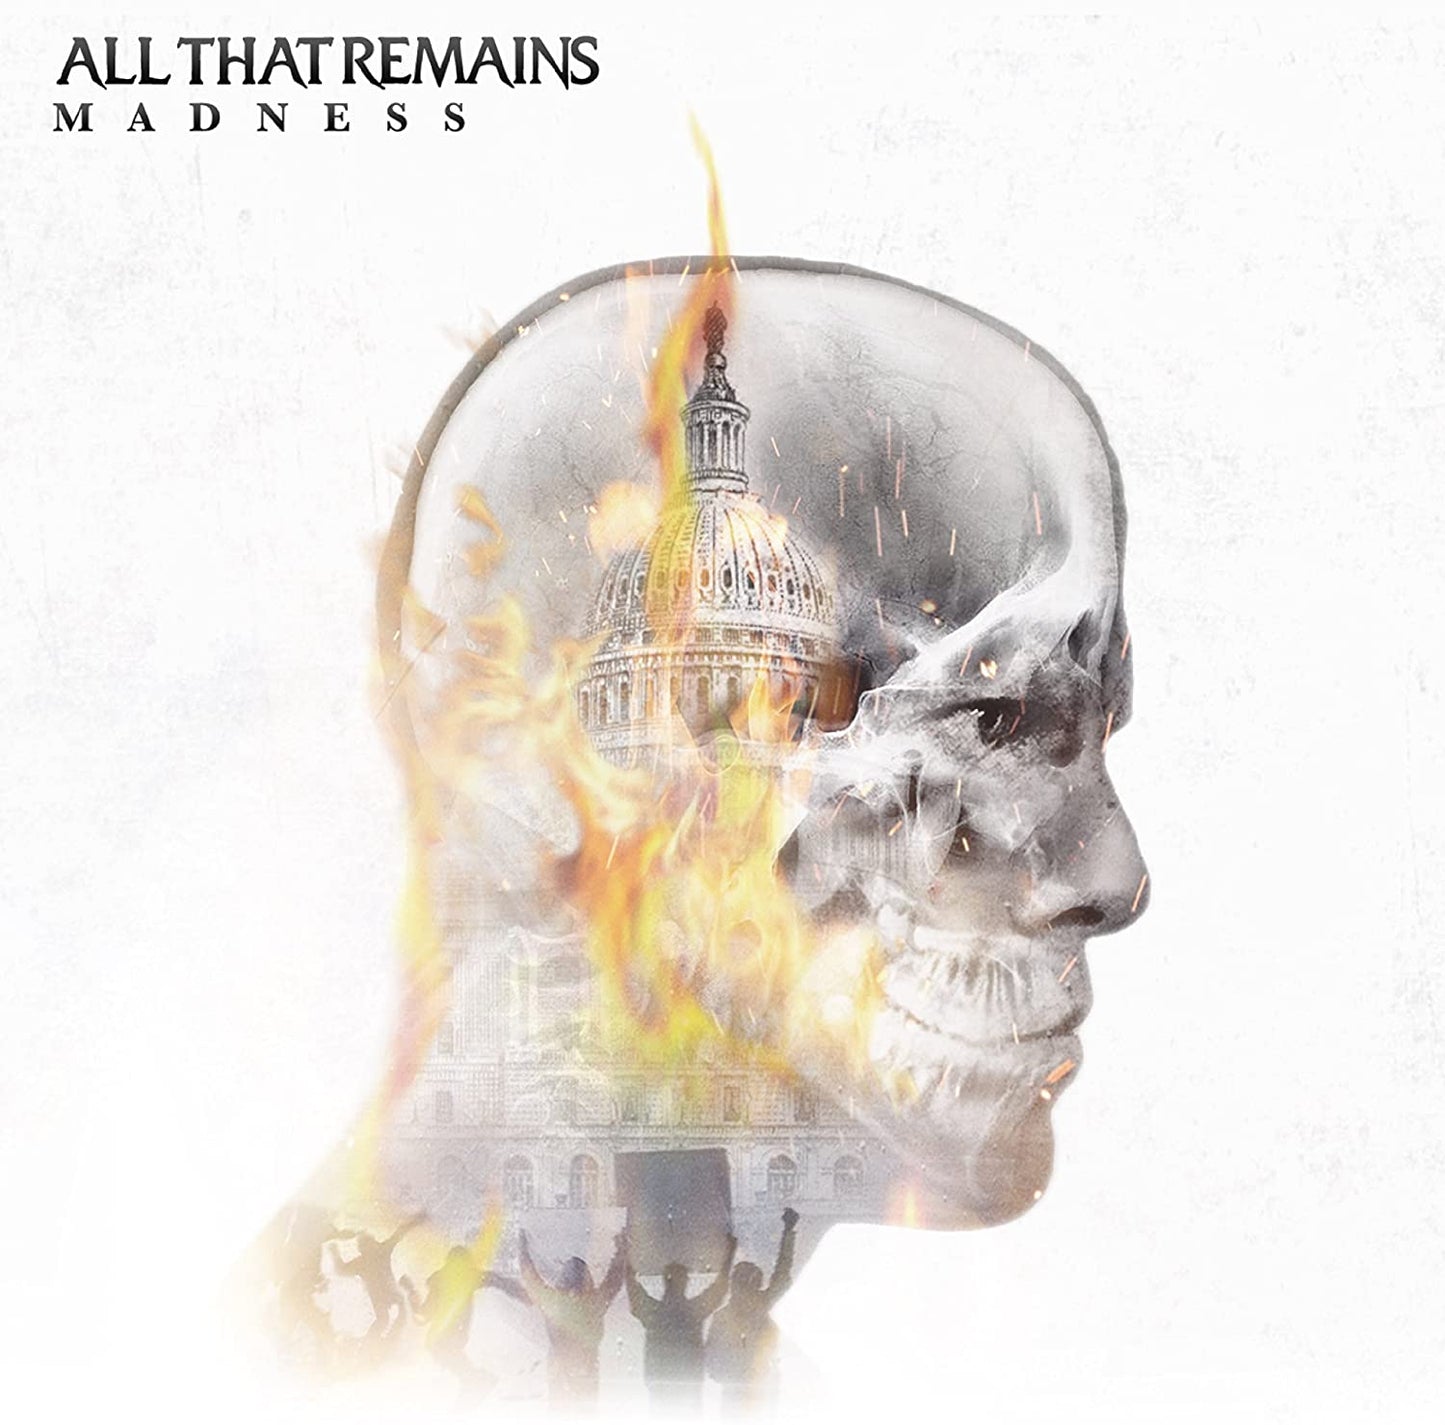 All That Remains - Madness - CD